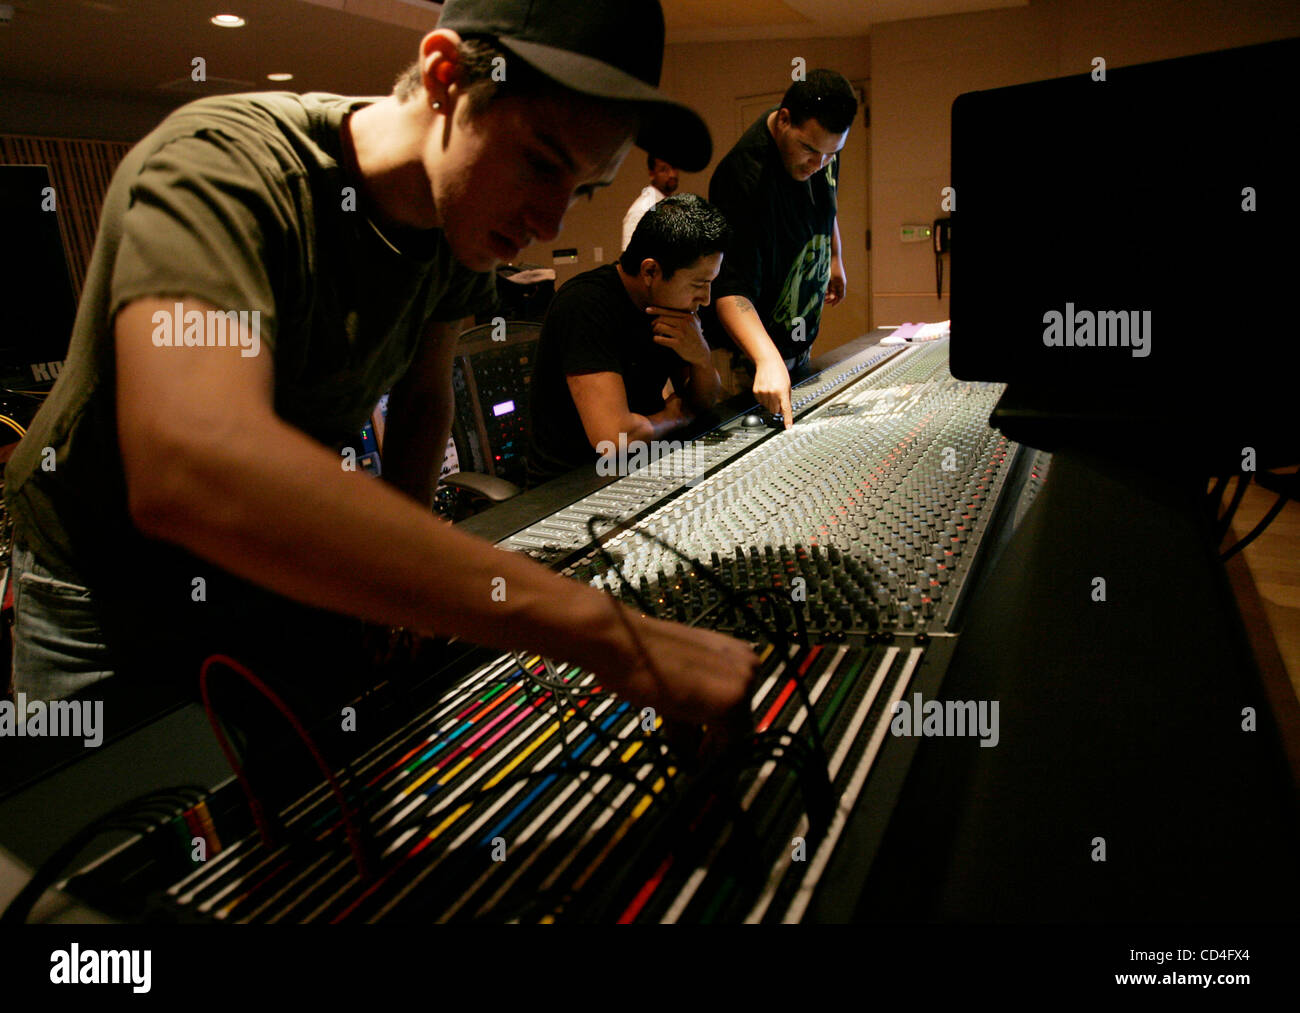 October 6, 2008,  San Diego,  California, USA    DANIEL CABEZA DE BACA (cq), left, plugs in microphone connections while MARCO RODRIGUEZ, seated, and SCOTT JORDAN work their way through the levels on the soundboard.  A high end state-of-the-art music recording studio was constructed at Southwestern  Stock Photo